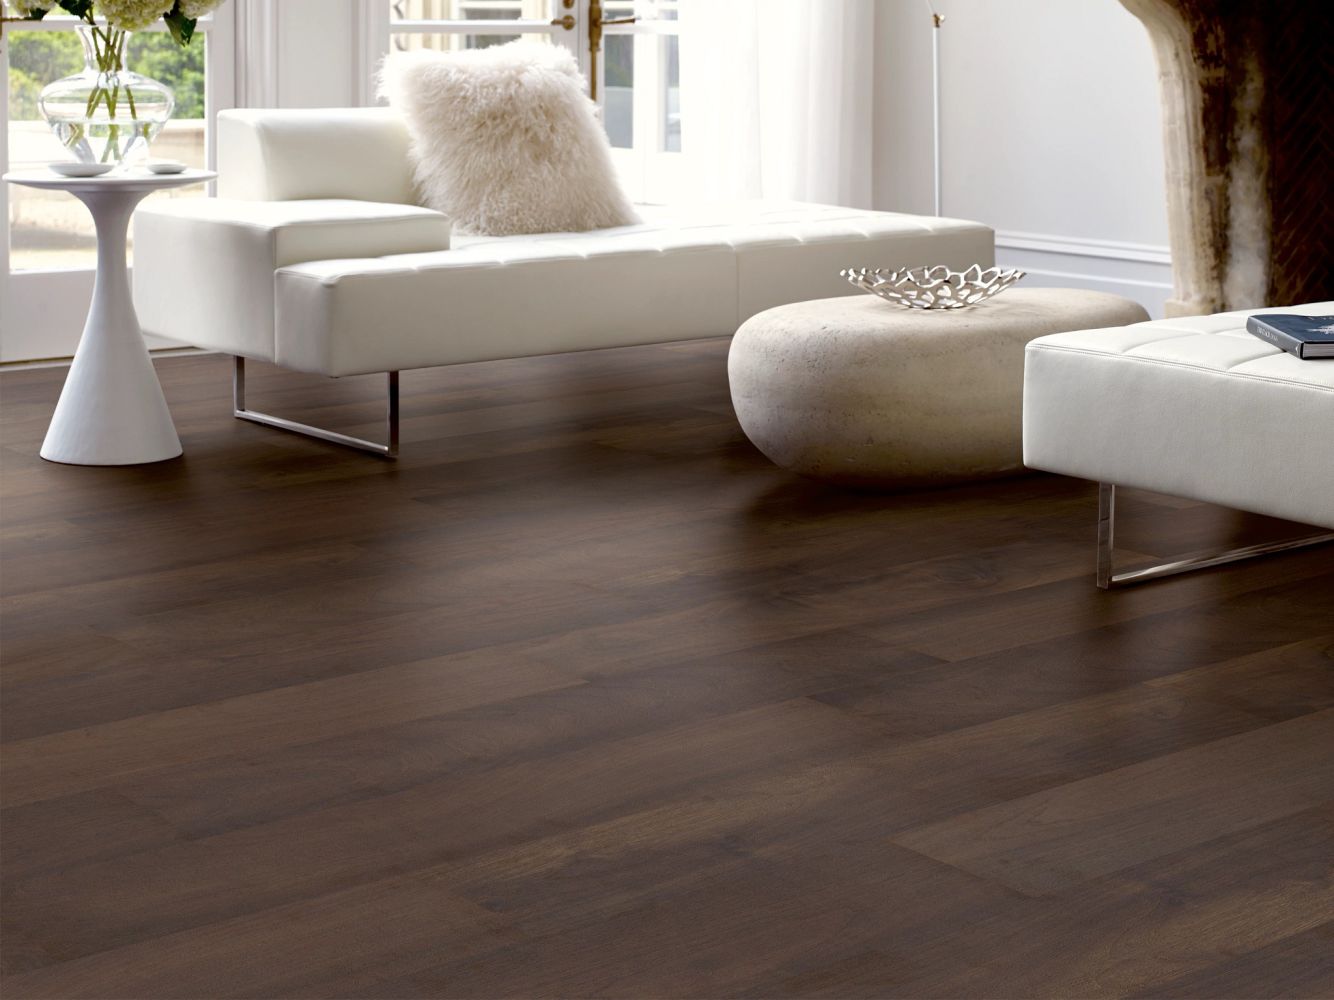 Shaw Floors Resilient Residential Prodigy Hdr Plus Simplicity 07095_2038V